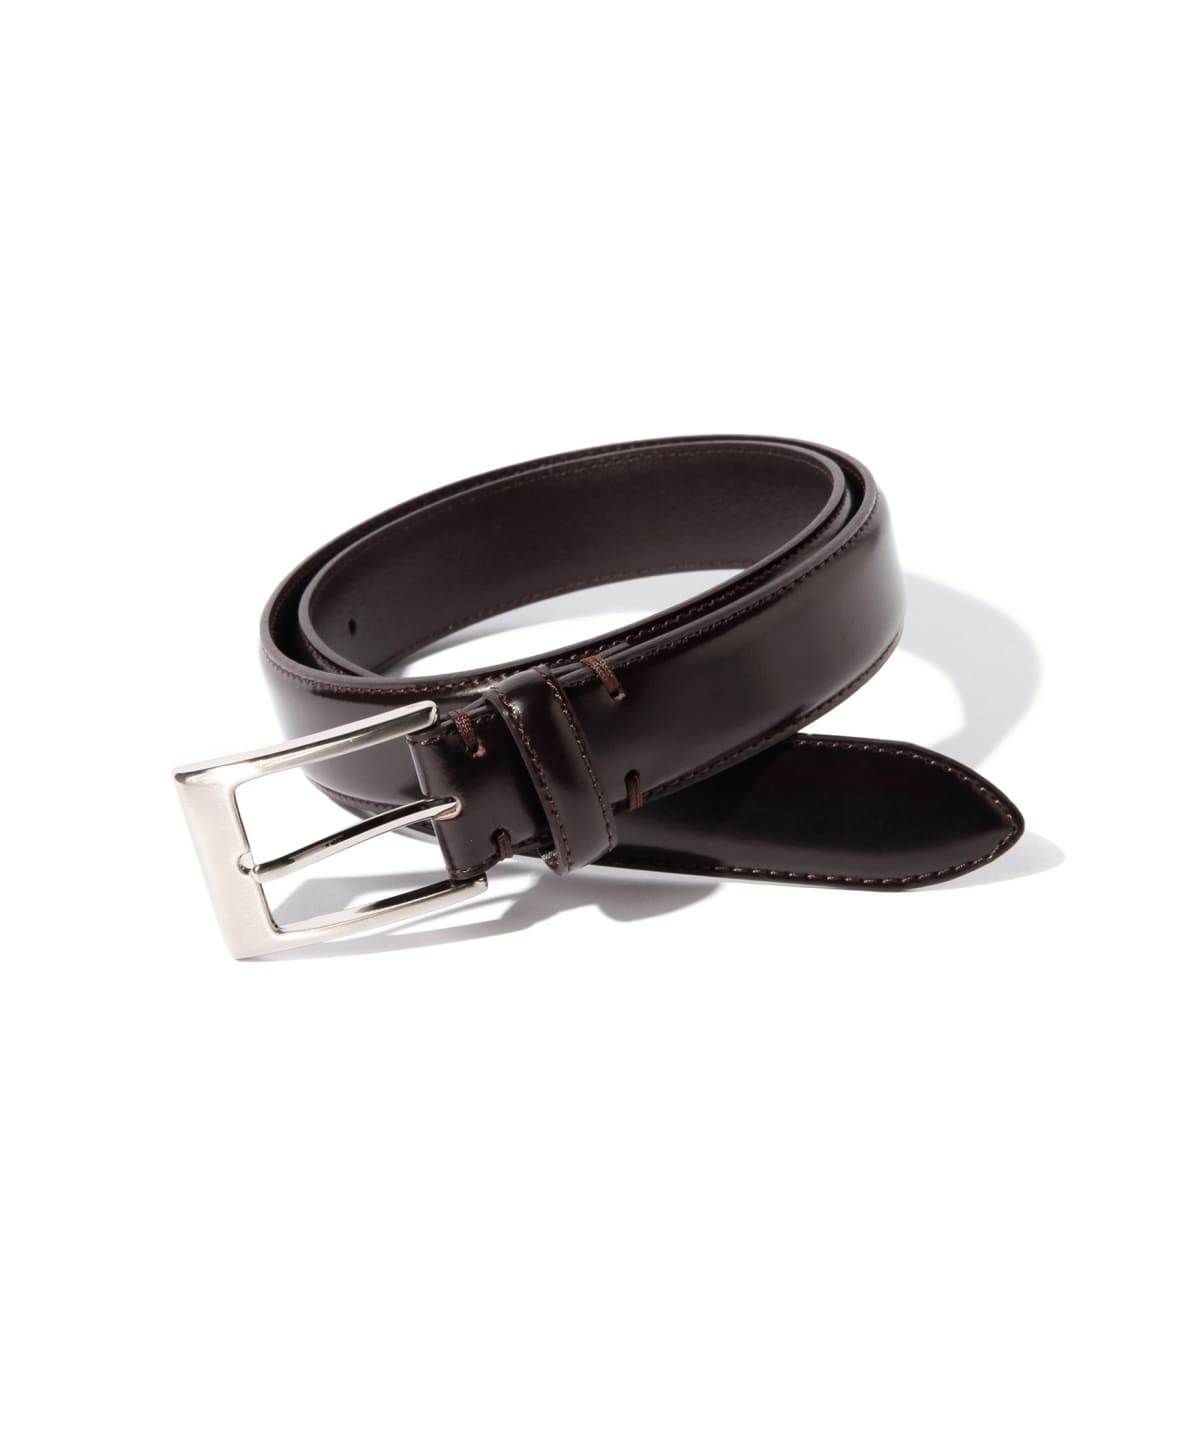 BEAMS BEAMS / Soft glass leather belt (fashion miscellaneous